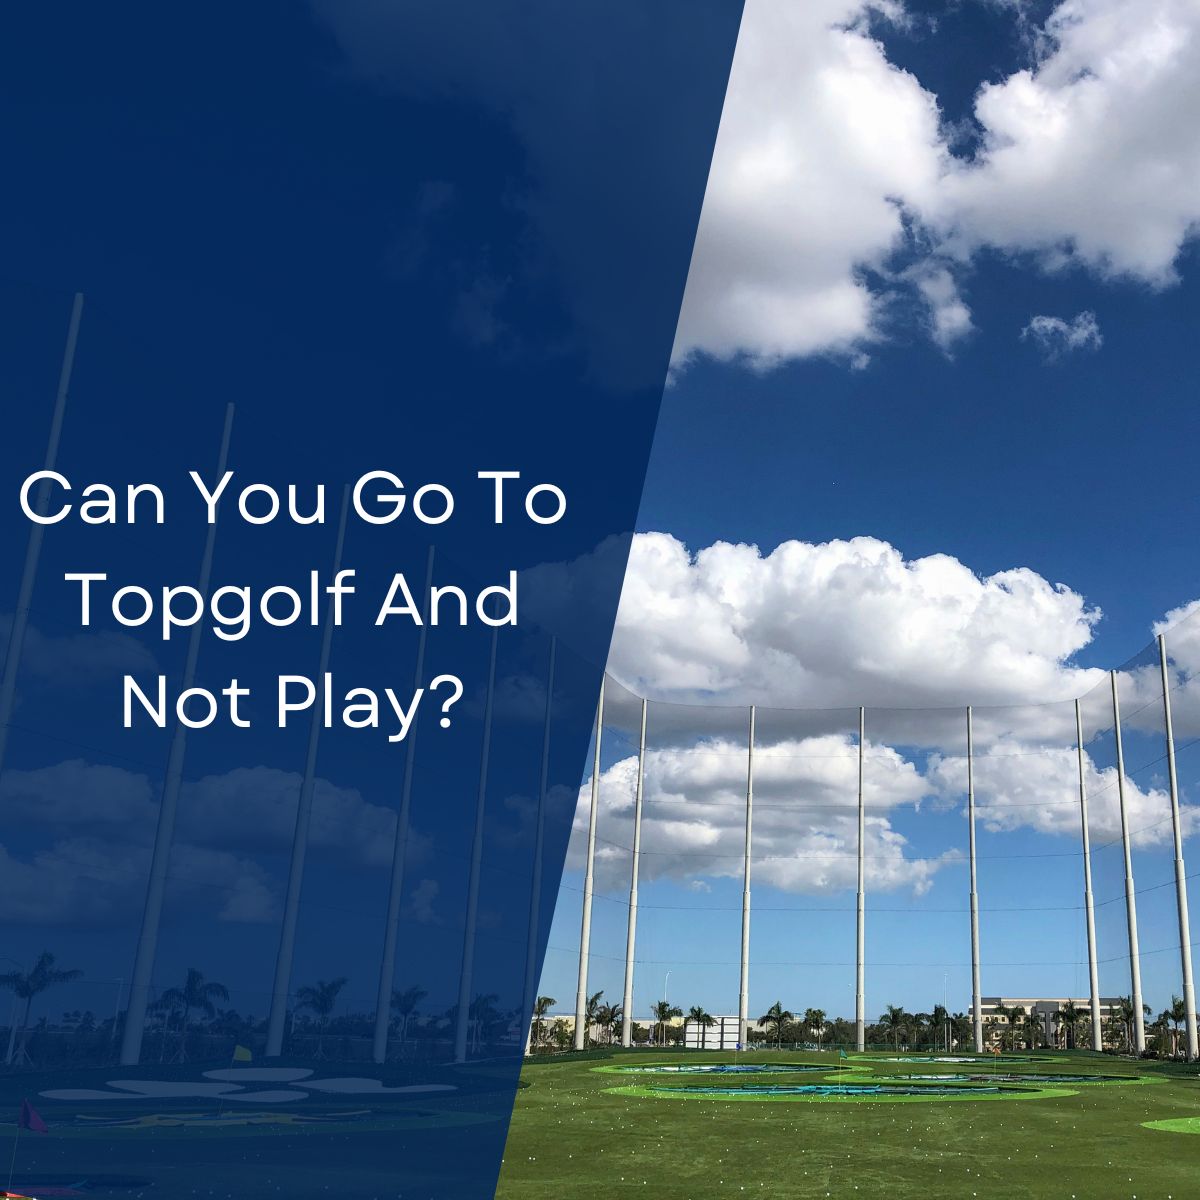 Can You Go To Topgolf And Not Play?